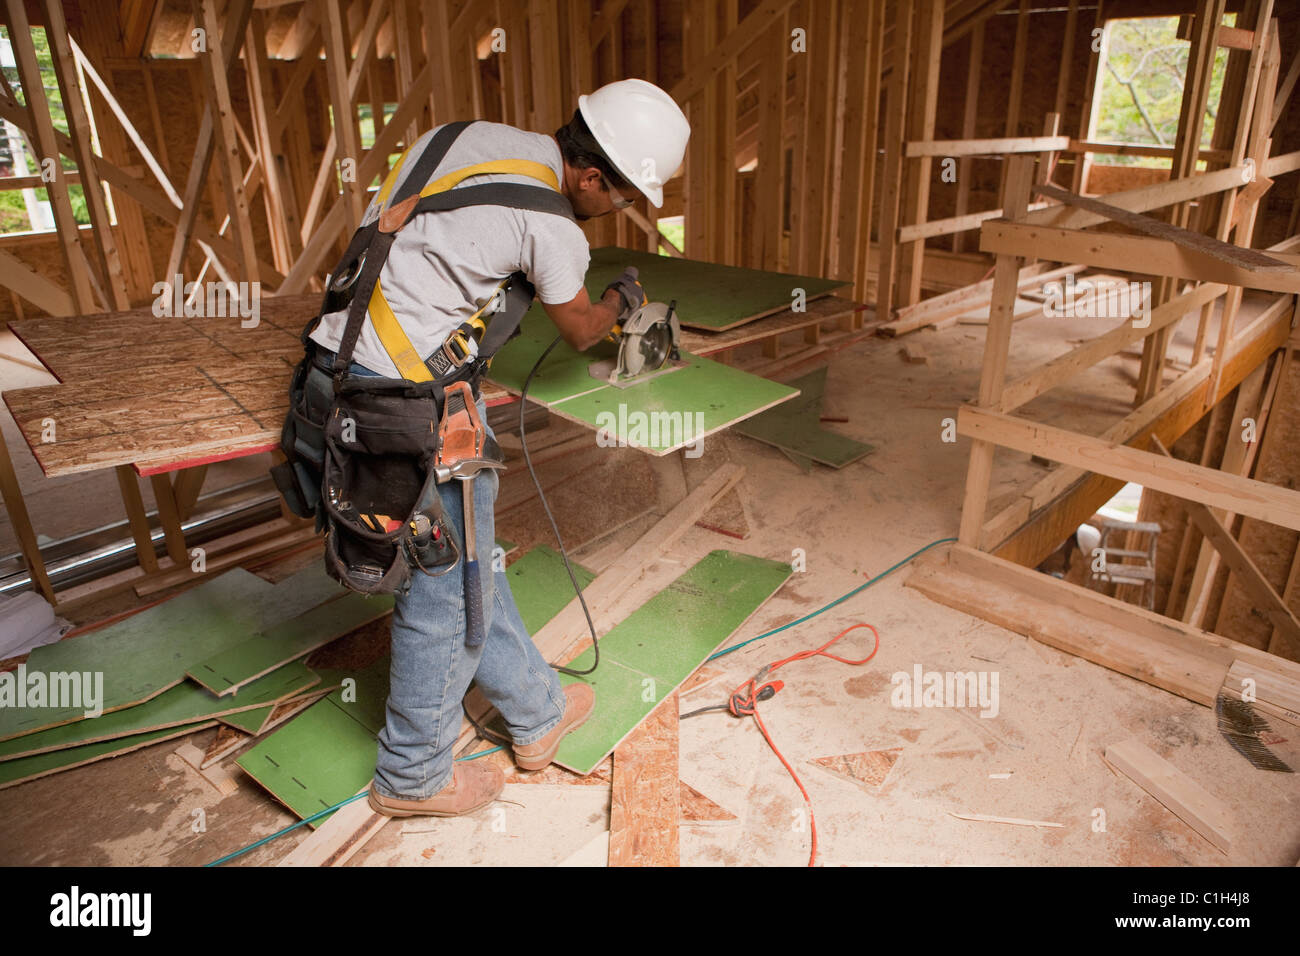 Carpenter using a circular saw on exterior wall sheathing in a house under construction Stock Photo